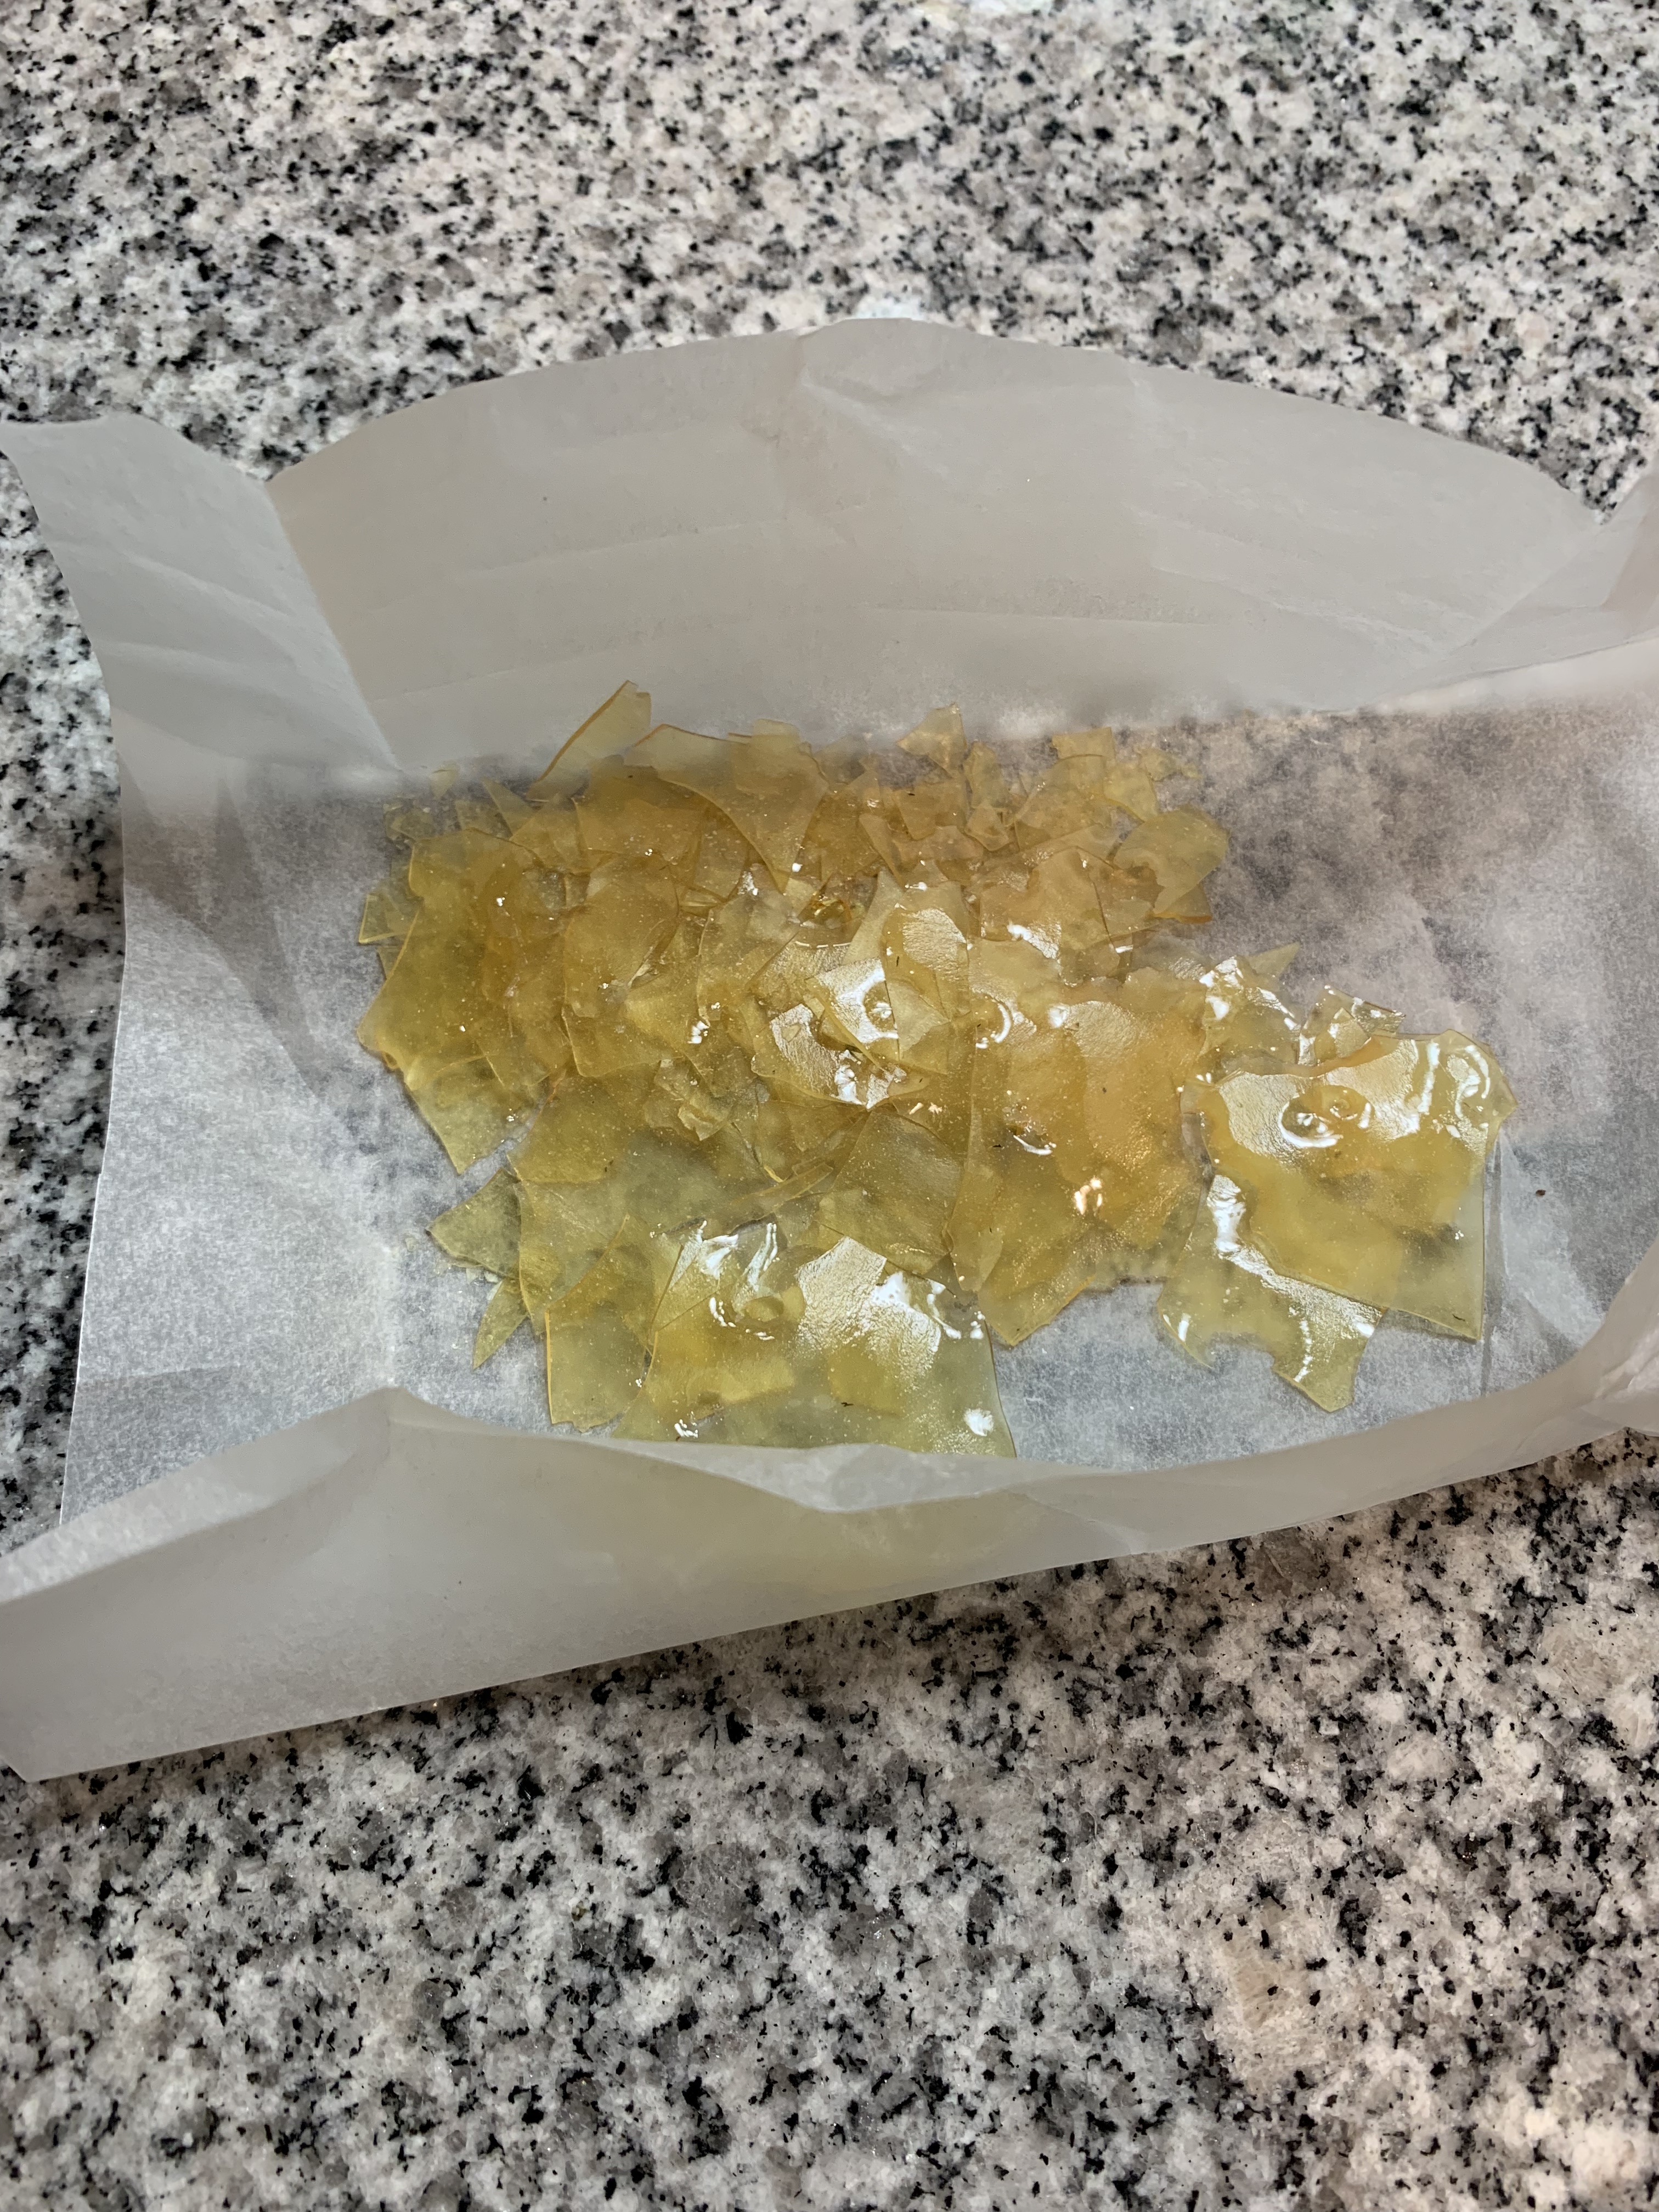 Fake shatter - Pine Resin cut hit Canada? - #39 by itsyoboydevon